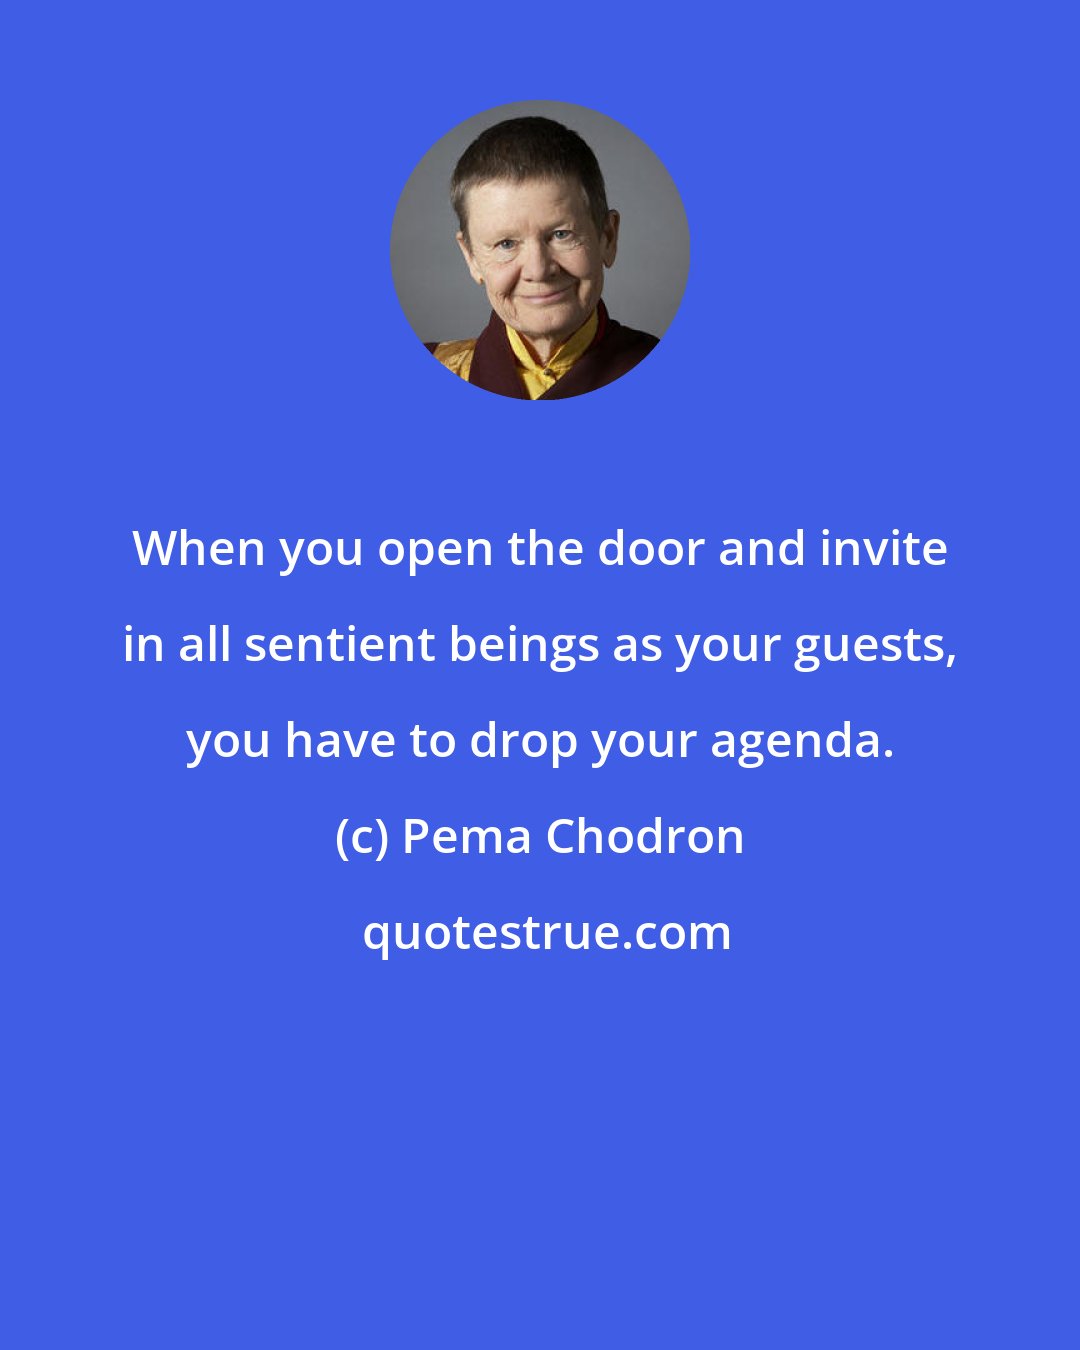 Pema Chodron: When you open the door and invite in all sentient beings as your guests, you have to drop your agenda.